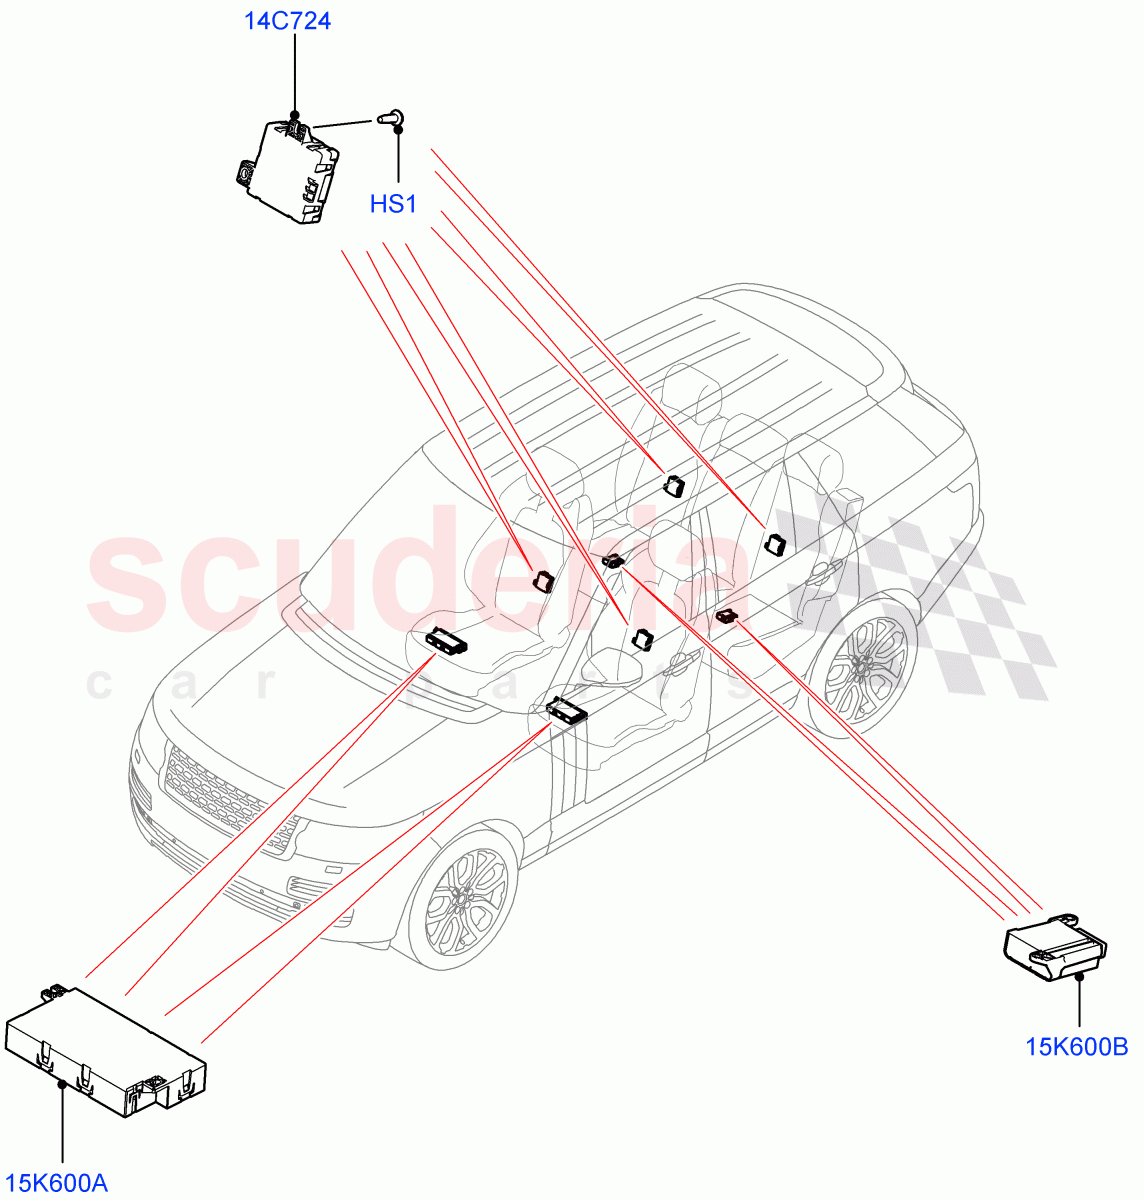 Vehicle Modules And Sensors(Seats)((V)FROMJA000001) of Land Rover Land Rover Range Rover (2012-2021) [5.0 OHC SGDI SC V8 Petrol]